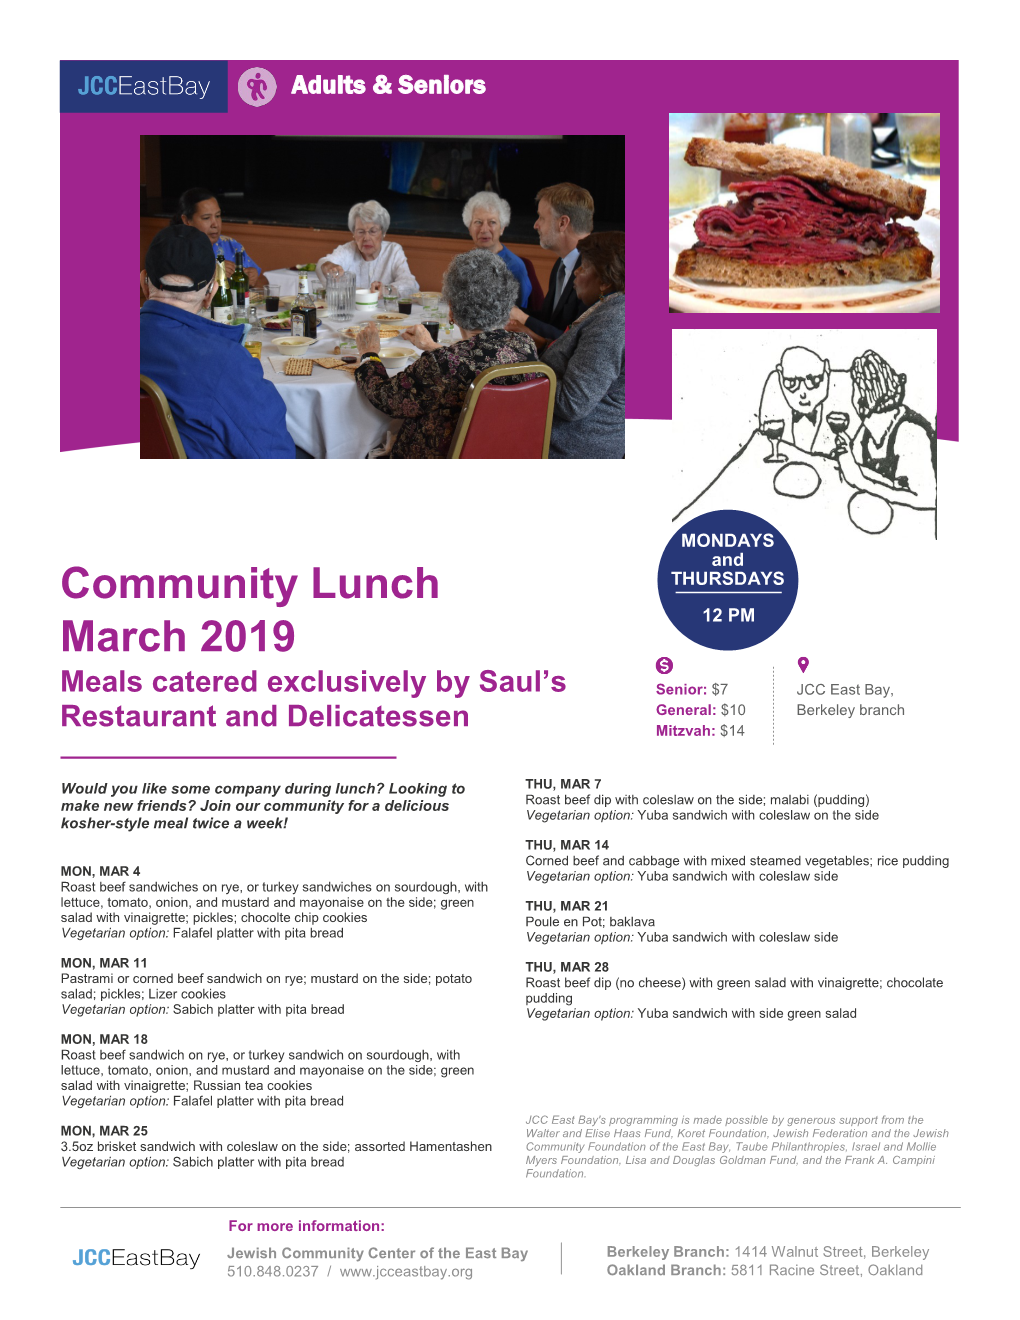 Community Lunch March 2019